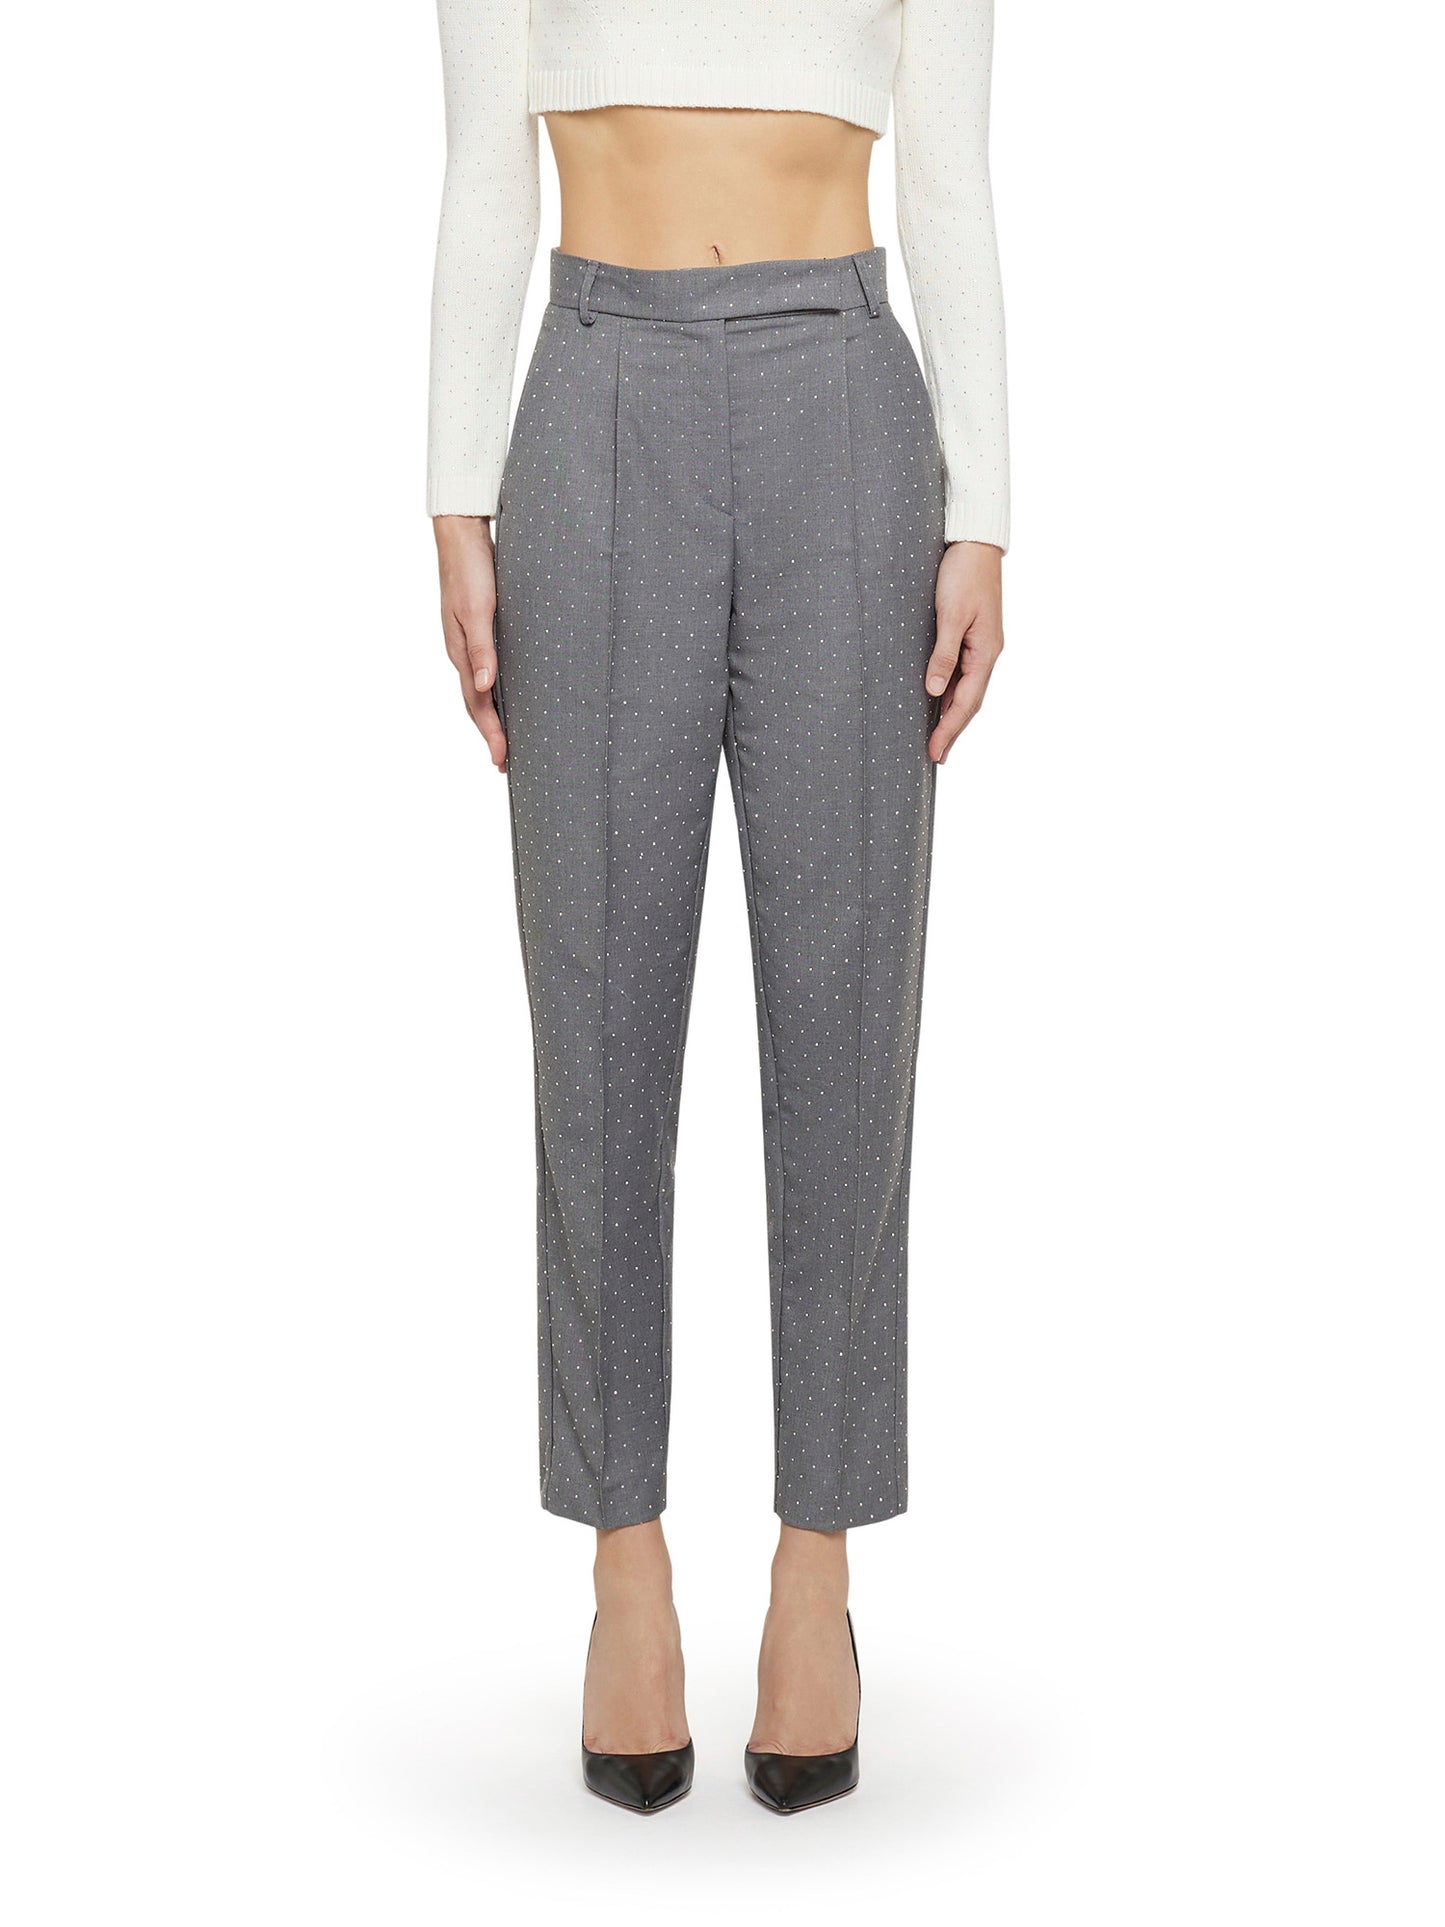 Straight micro-studded canvas trousers